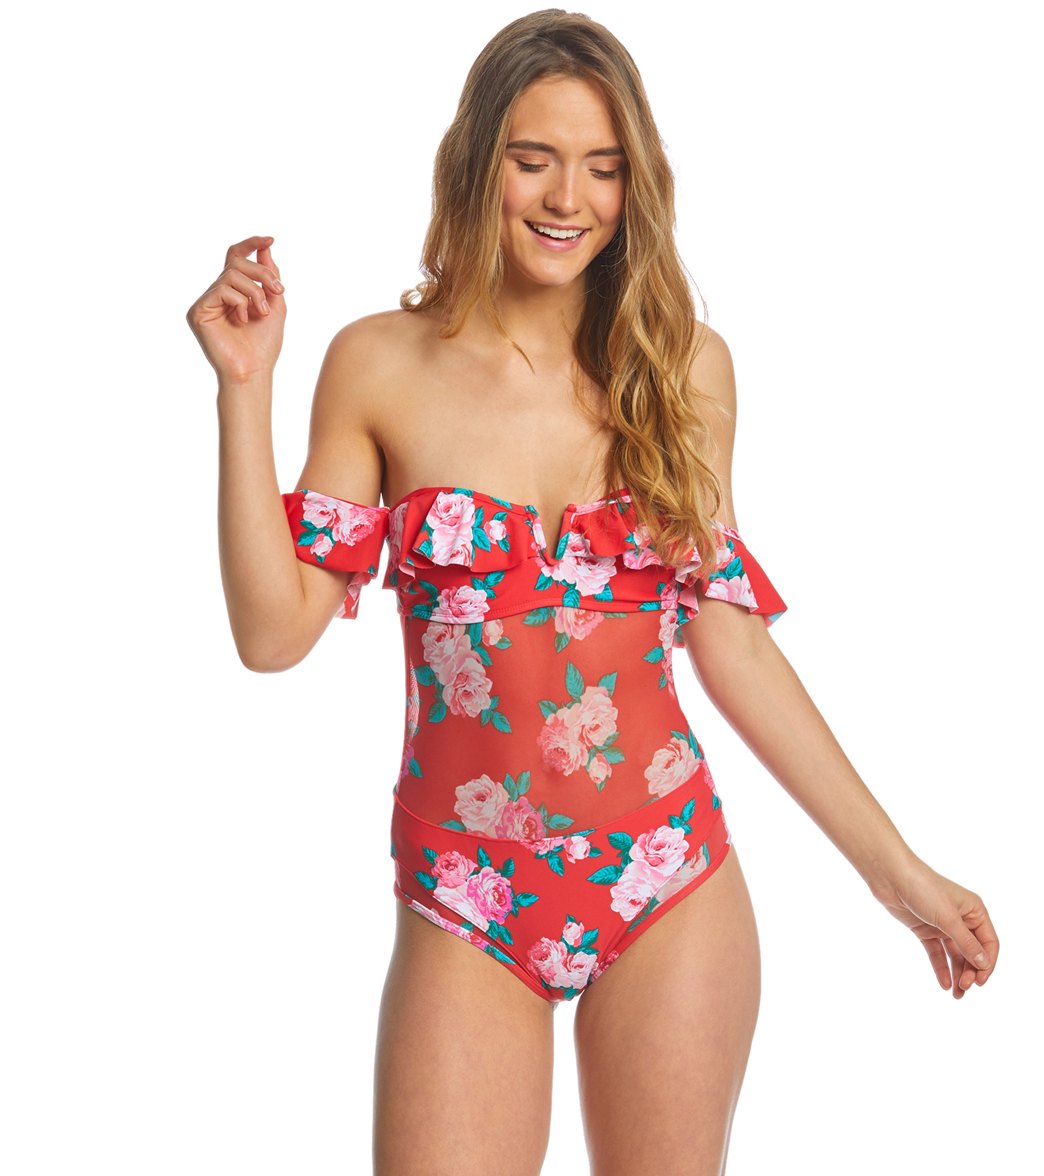 Betsey Johnson Rose Fantasy One Piece Swimsuit - Red Small - Swimoutlet.com